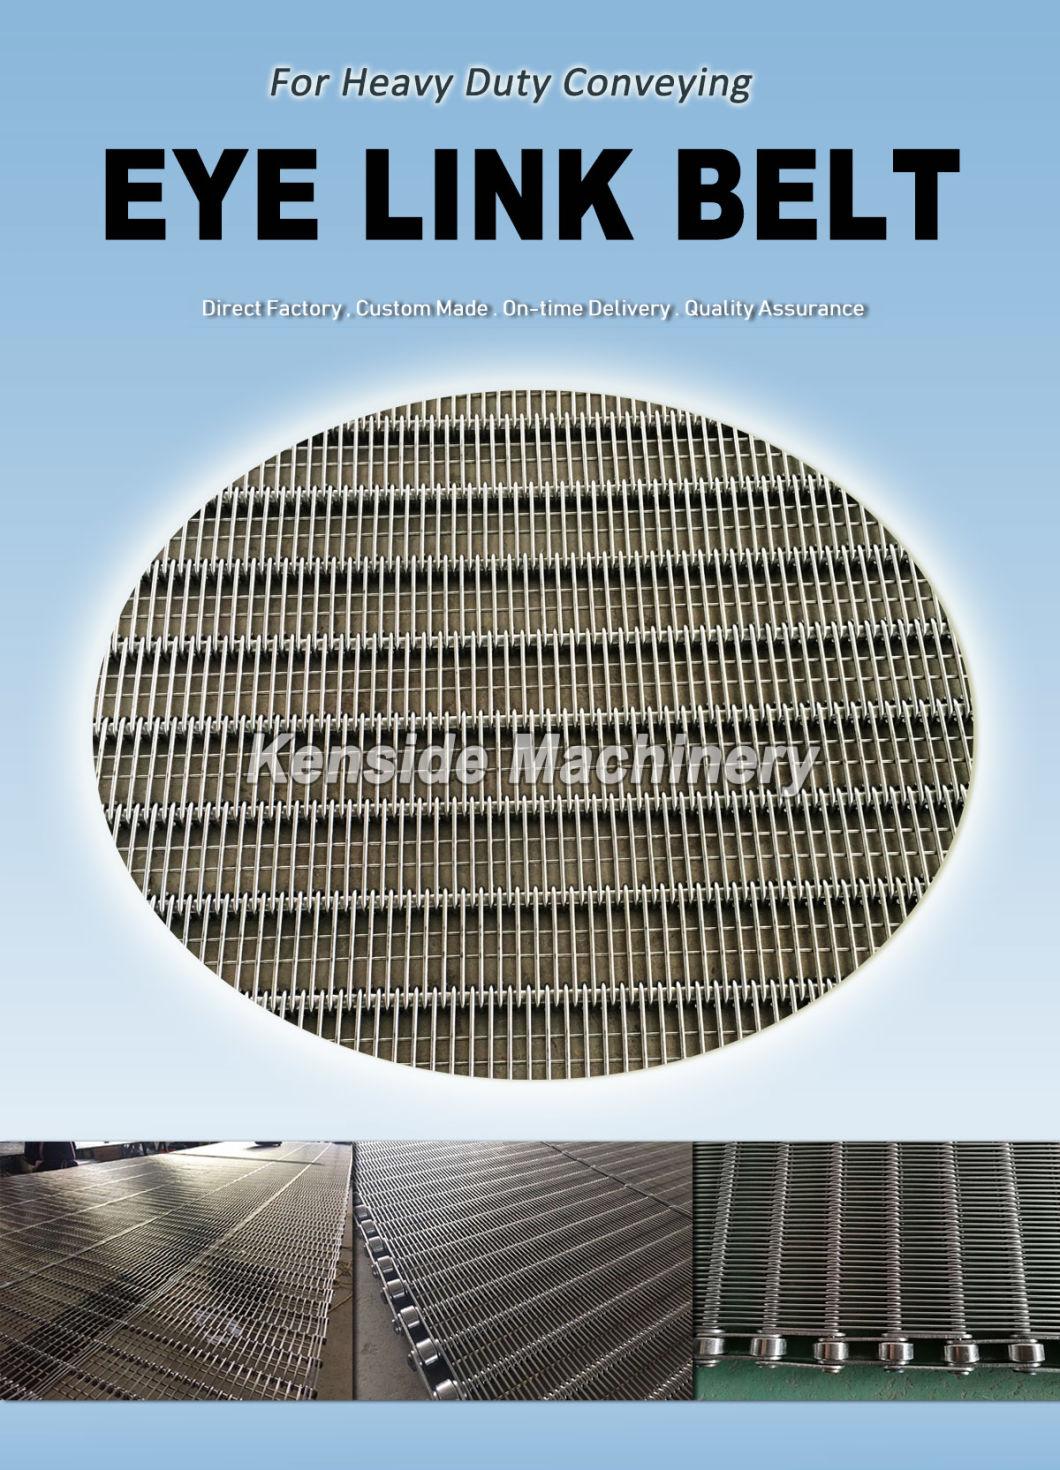 Eye Link Belt for Food Processing, Heat Treating, Surface Treating